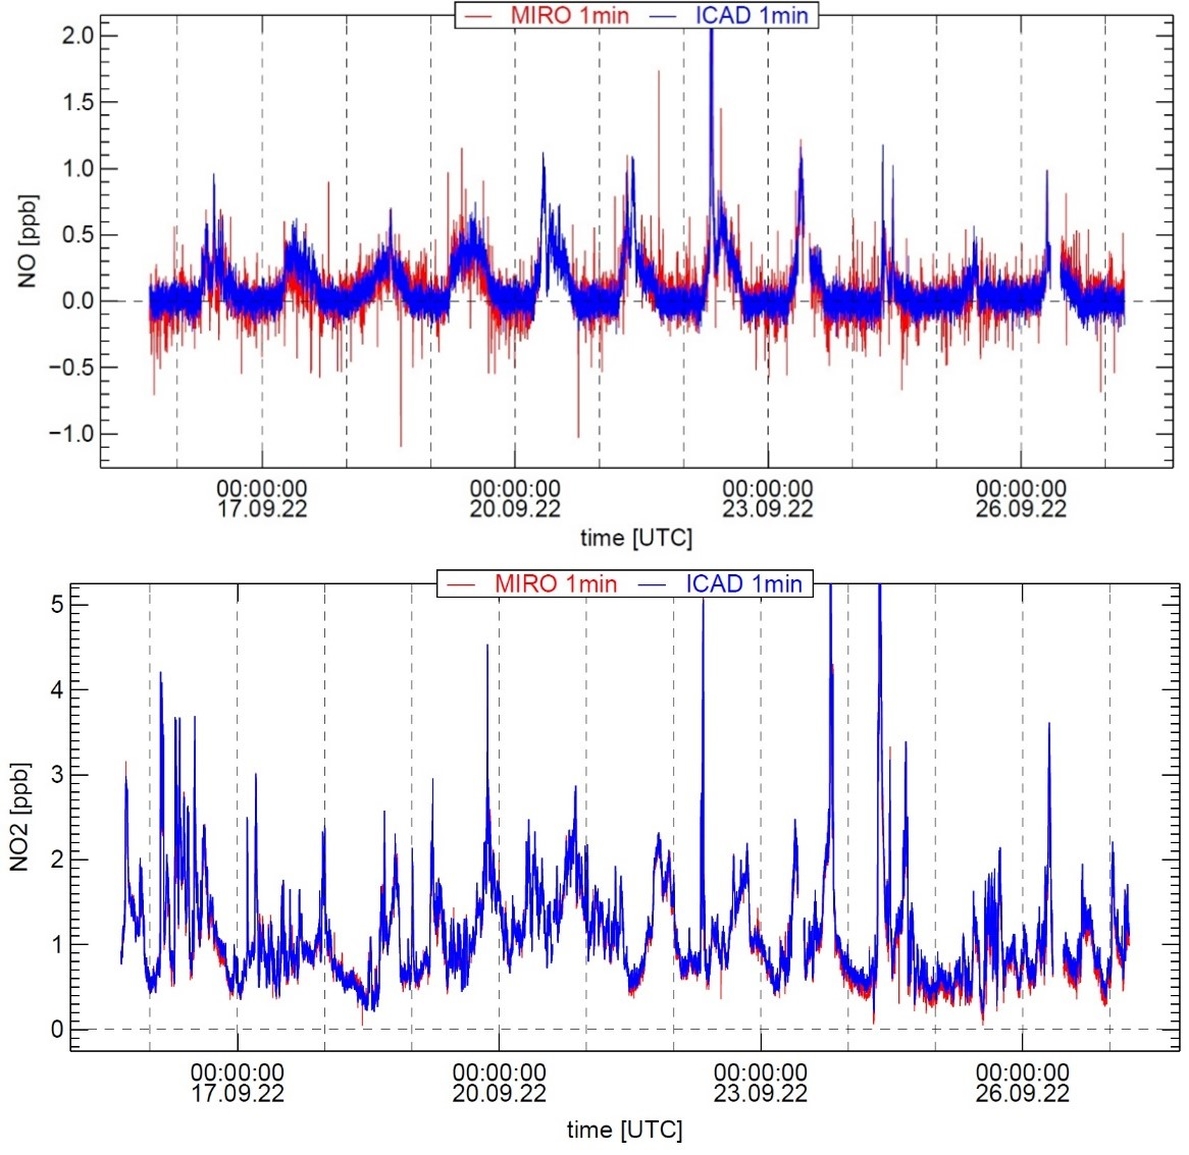 Time series for NO and NO2 at Hohenpeissenberg observed with the tunable diode laser spectrometer (MIRO, in red) and the Iterative Cavity-Enhanced DOAS instrument (ICAD, in blue) of FZJ.